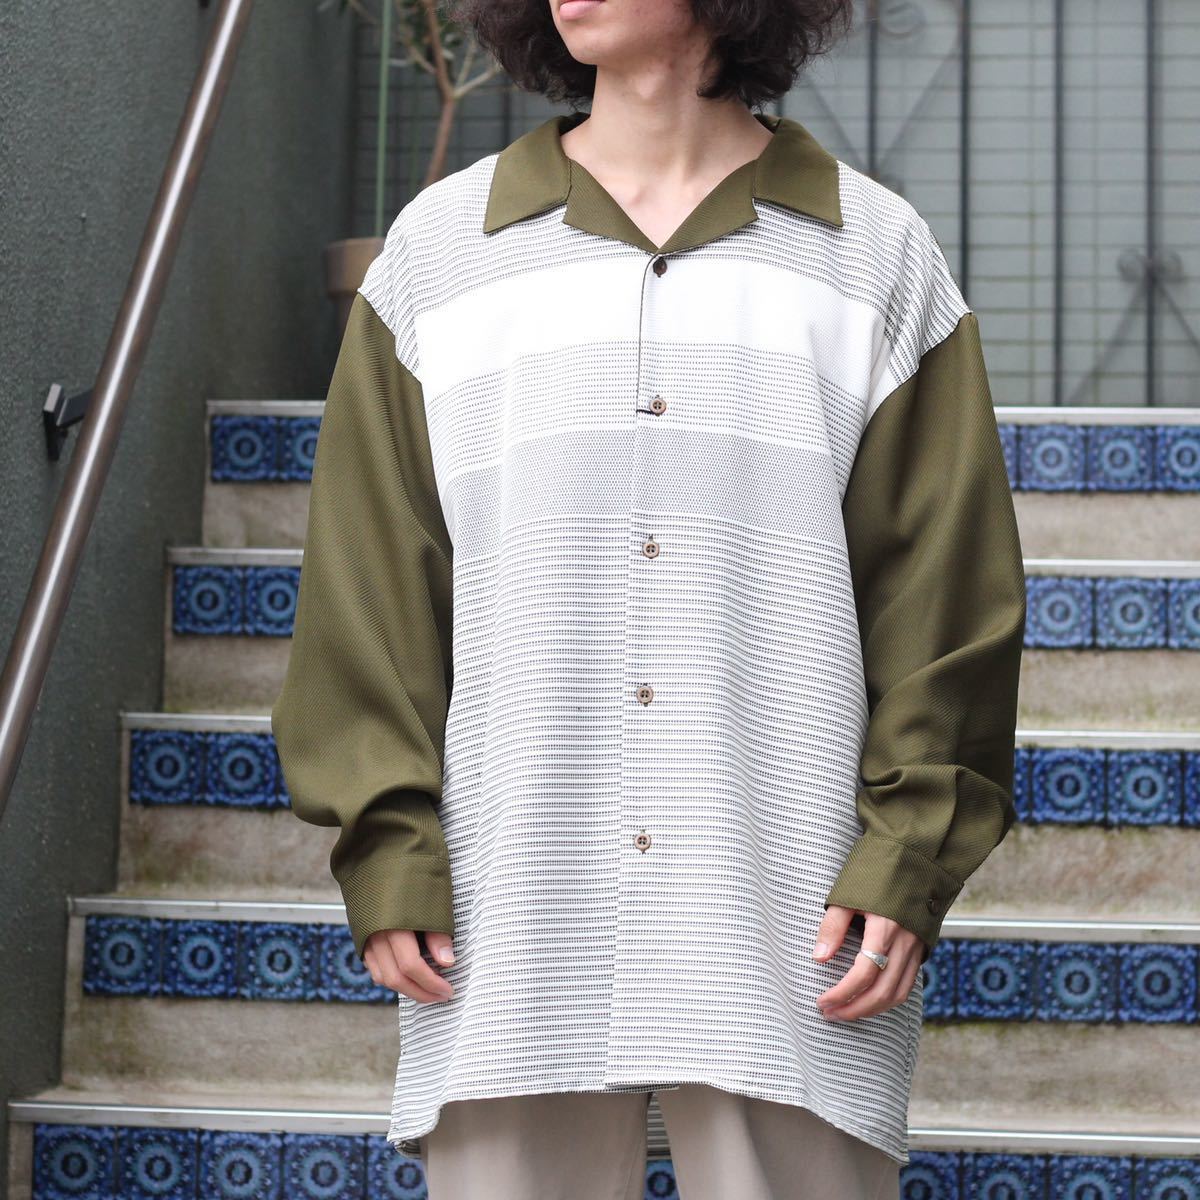 USA VINTAGE MONTIQUE 2 TONE DESIGN EXTRA OVER SHIRT/アメリカ古着2